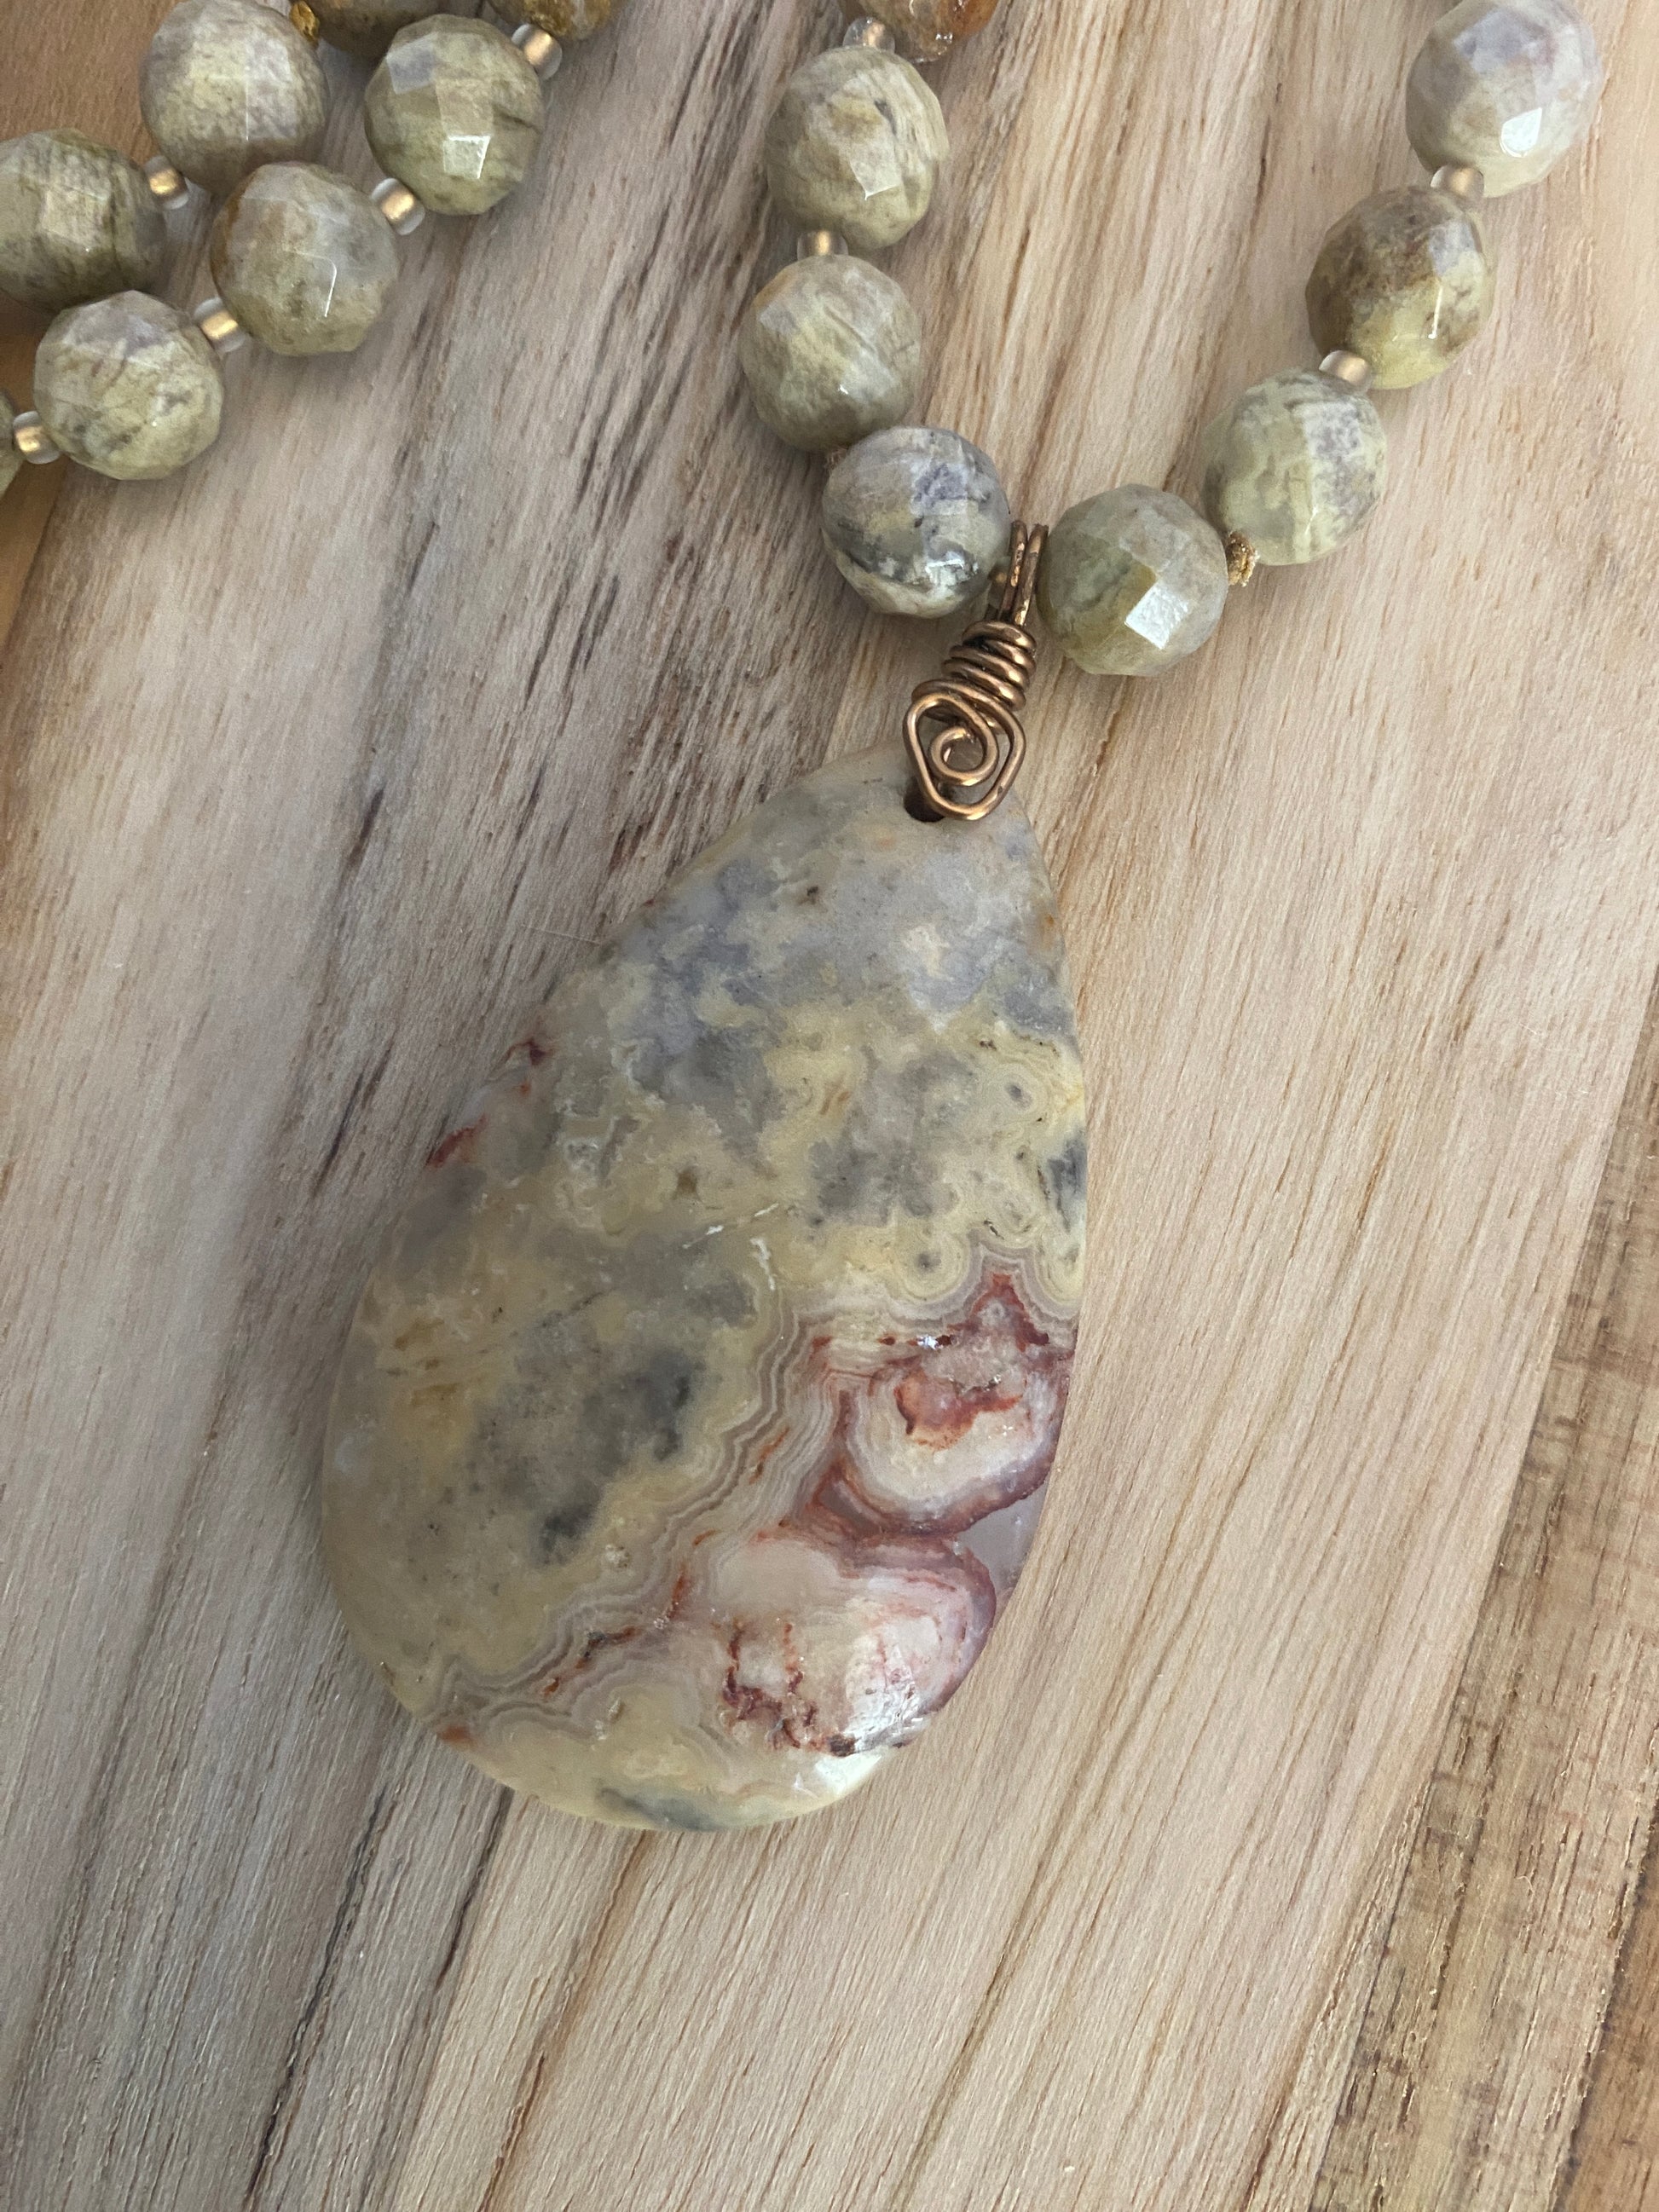 28" Long Beaded Crazy Lace Agate Pendant Necklace with Faceted Agate & Crystal Beads - My Urban Gems